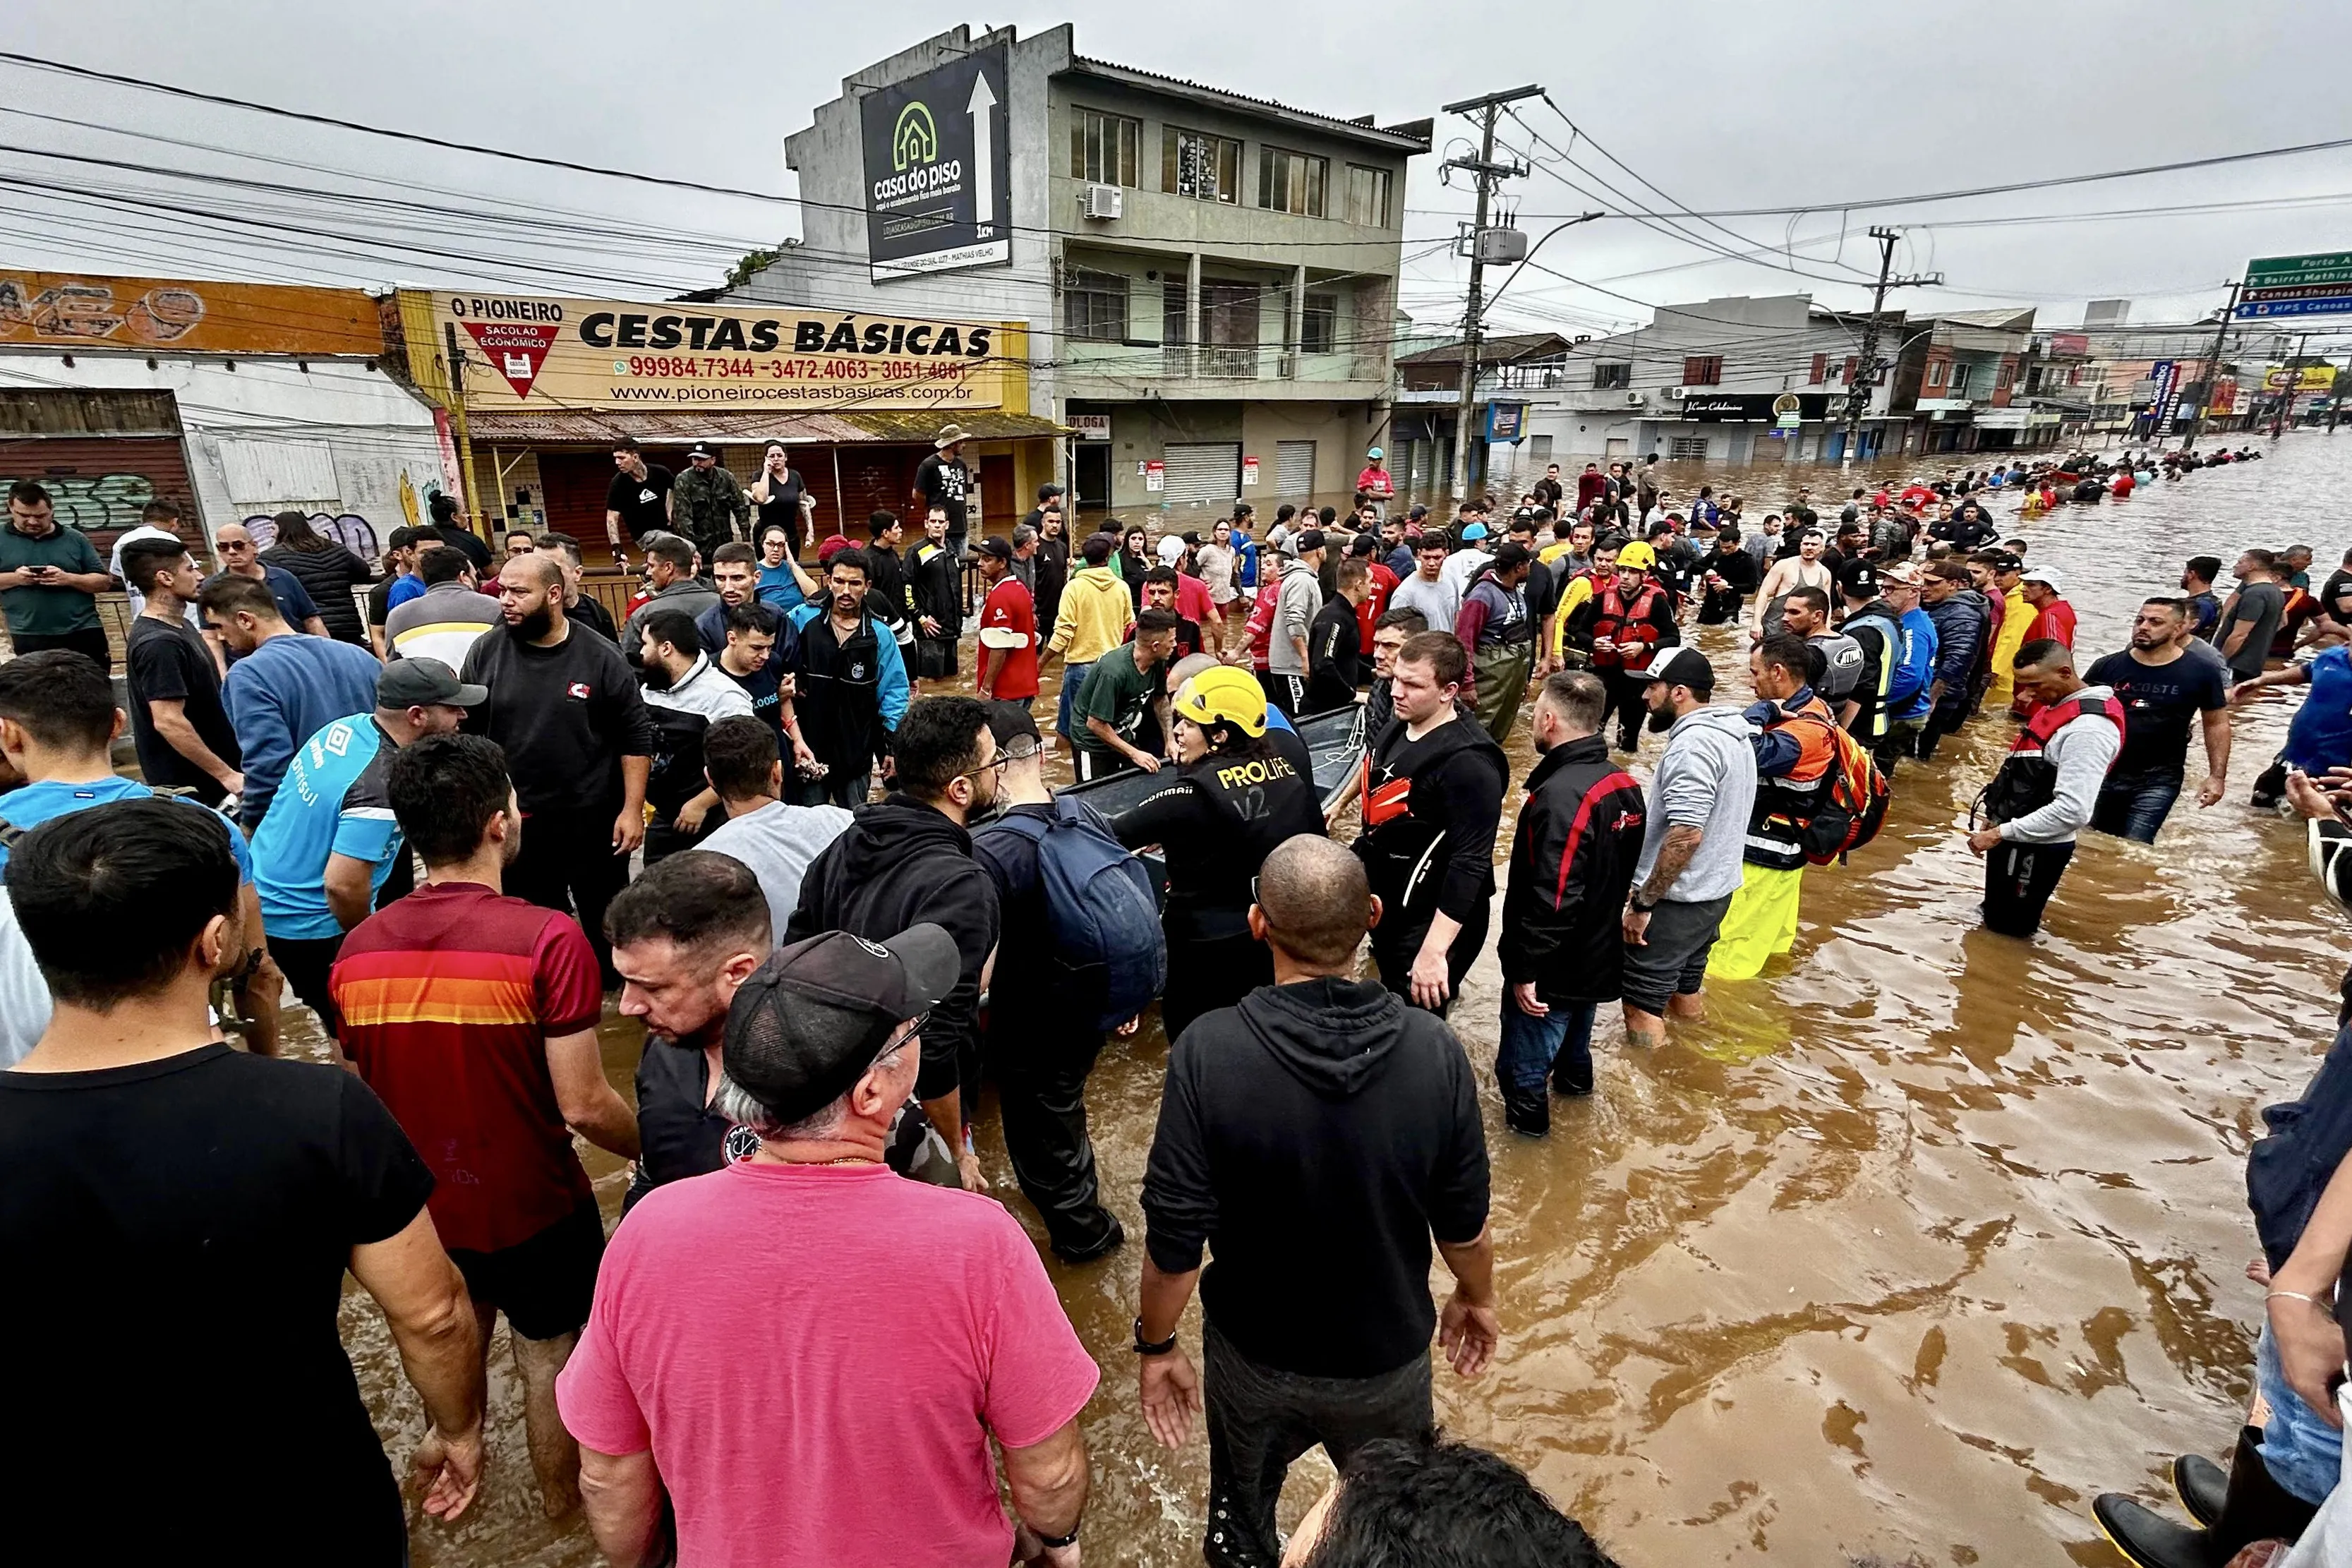 This handout picture released by the Canoas City Hall shows rescue teams and volunteers helping flood victims in Canoas, Rio Grande do Sul state, Brazil on May 4, 2024. The challenge is titanic and against the clock: authorities and neighbours are trying to avoid an even greater tragedy than the one already experienced in the Brazilian state of Rio Grande do Sul, where 66 people died and 80,000 were displaced by the floods, according to the authorities. (Photo by Alisson MOURA / Canoas City Hall / AFP) / RESTRICTED TO EDITORIAL USE - MANDATORY CREDIT "AFP PHOTO / CANOAS CITY HALL / ALISSON MOURA" - NO MARKETING NO ADVERTISING CAMPAIGNS - DISTRIBUTED AS A SERVICE TO CLIENTS